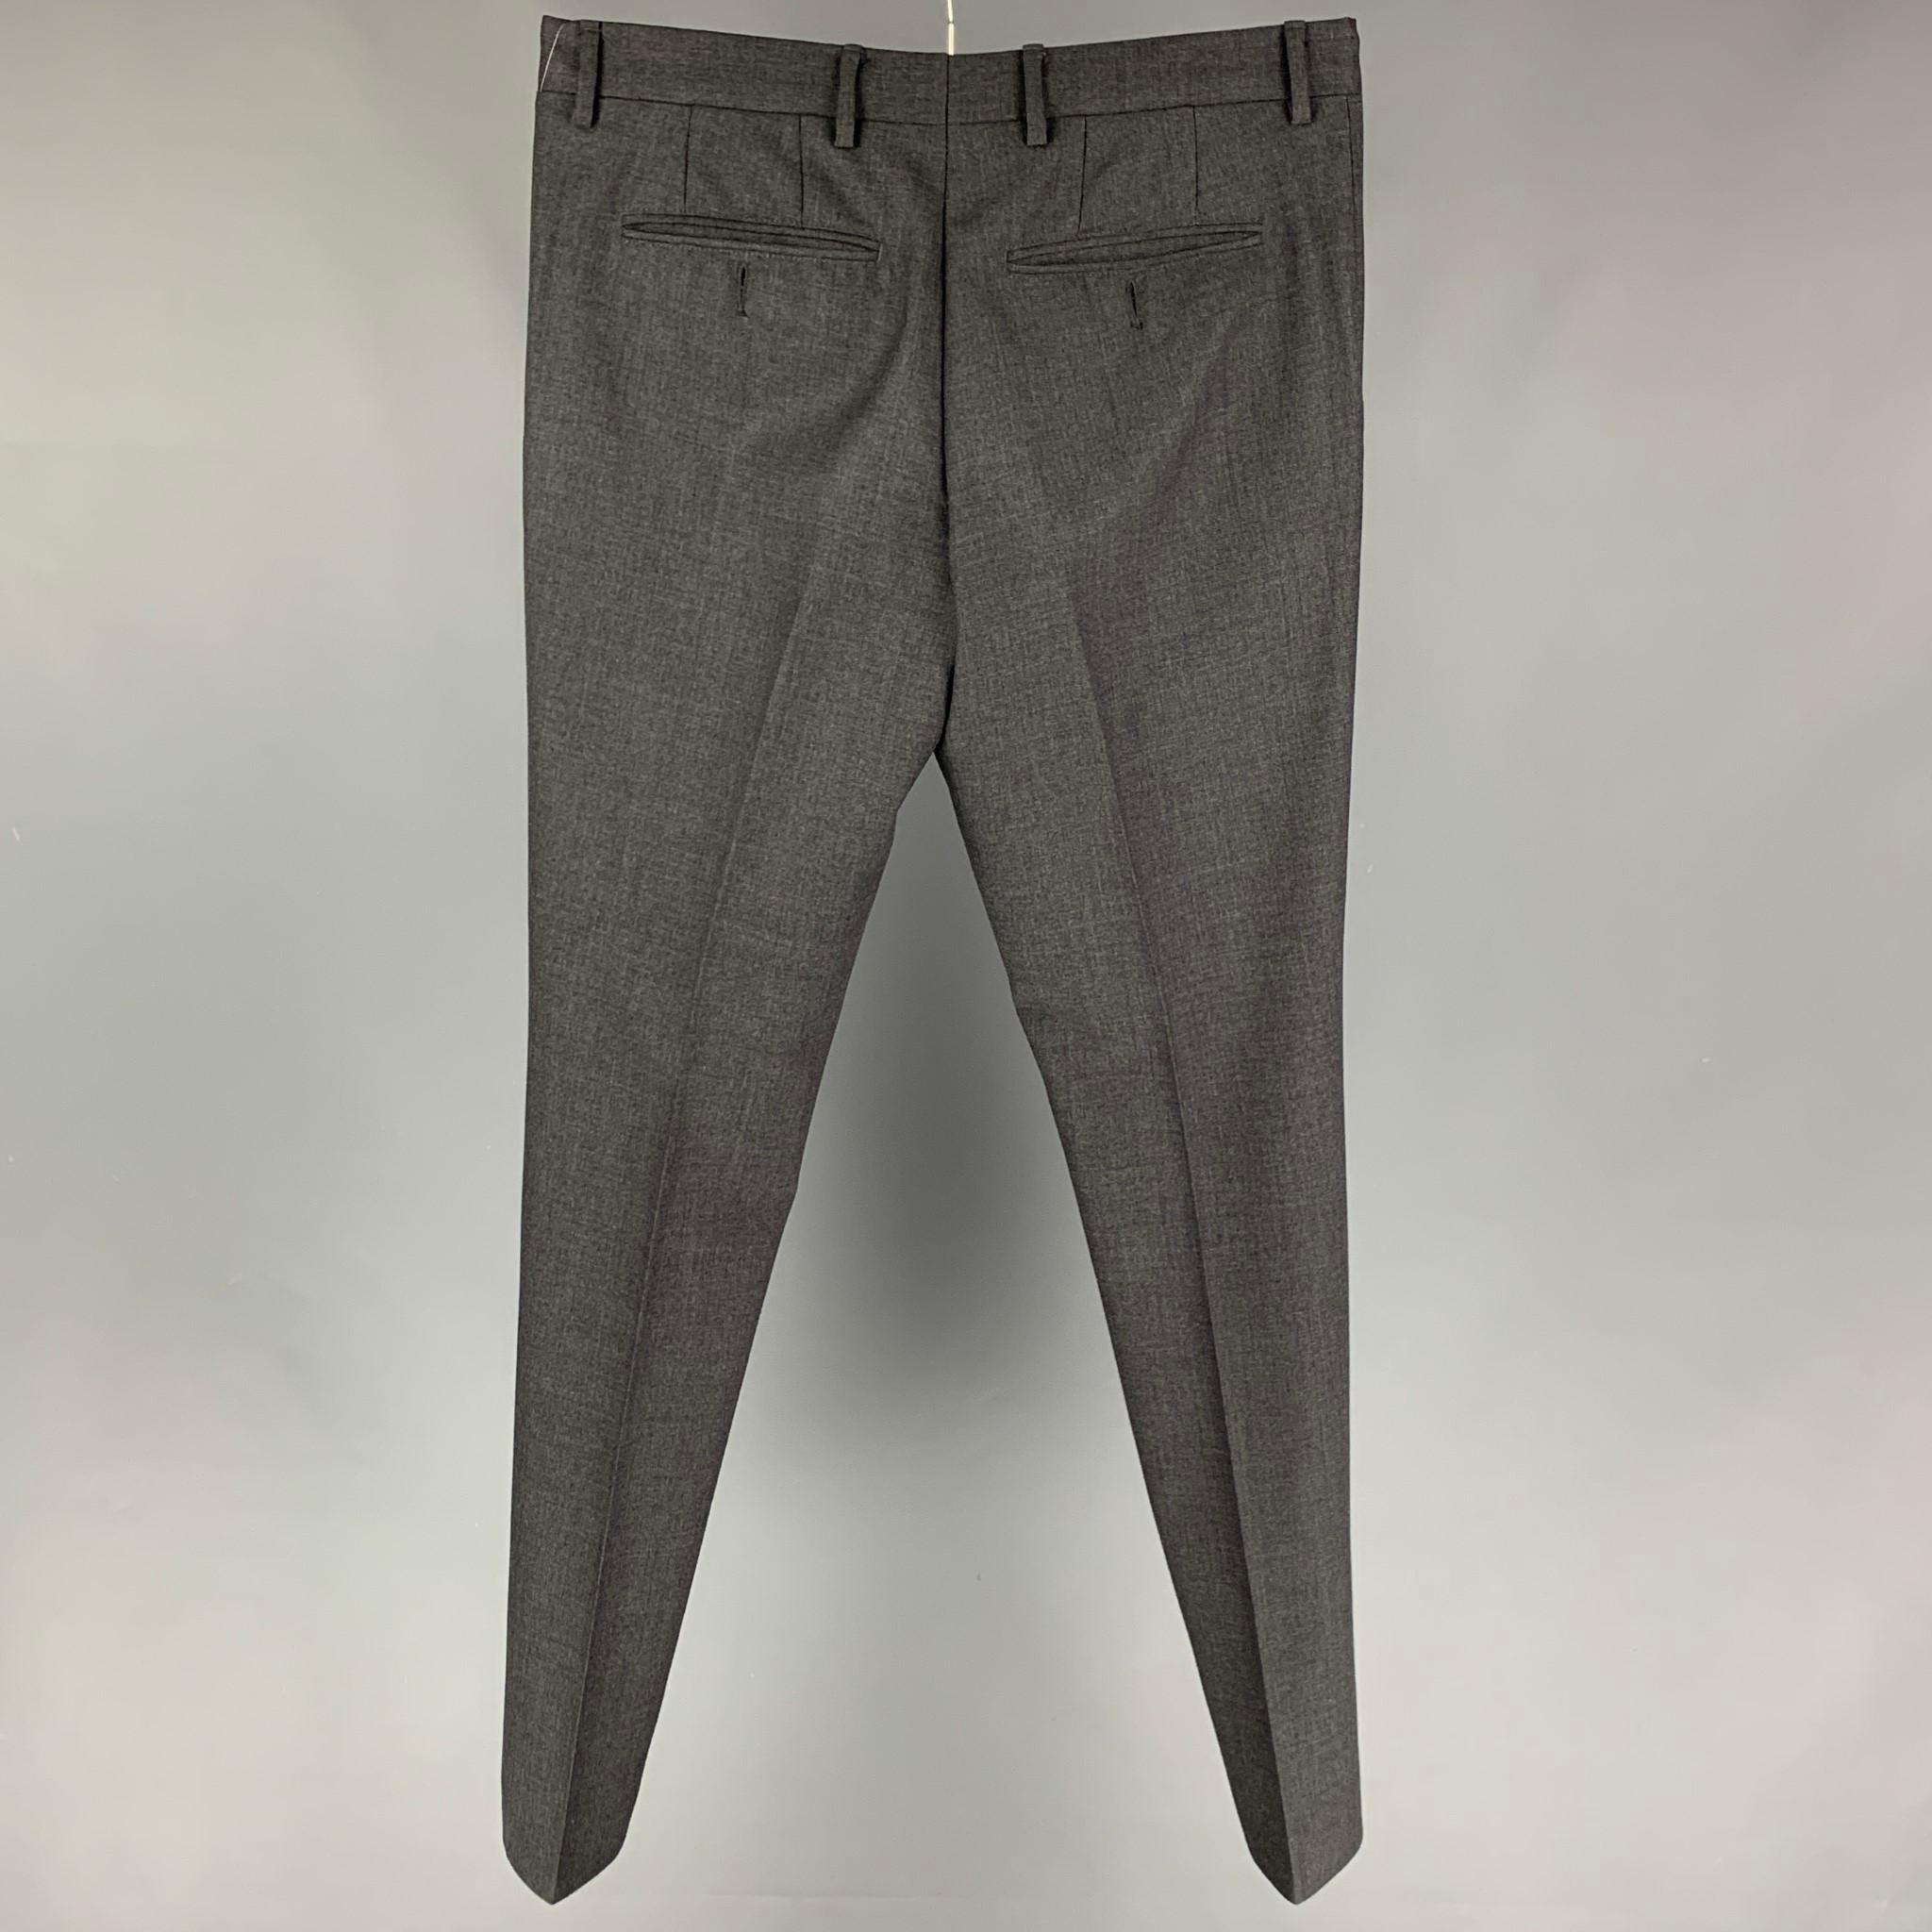 MARNI dress pants comes in a grey cotton featuring a flat front, front tab, and a button fly. Made in Italy. 

Very Good Pre-Owned Condition.
Marked: 48

Measurements:

Waist: 32 in.
Rise: 10 in.
Inseam: 33 in. 